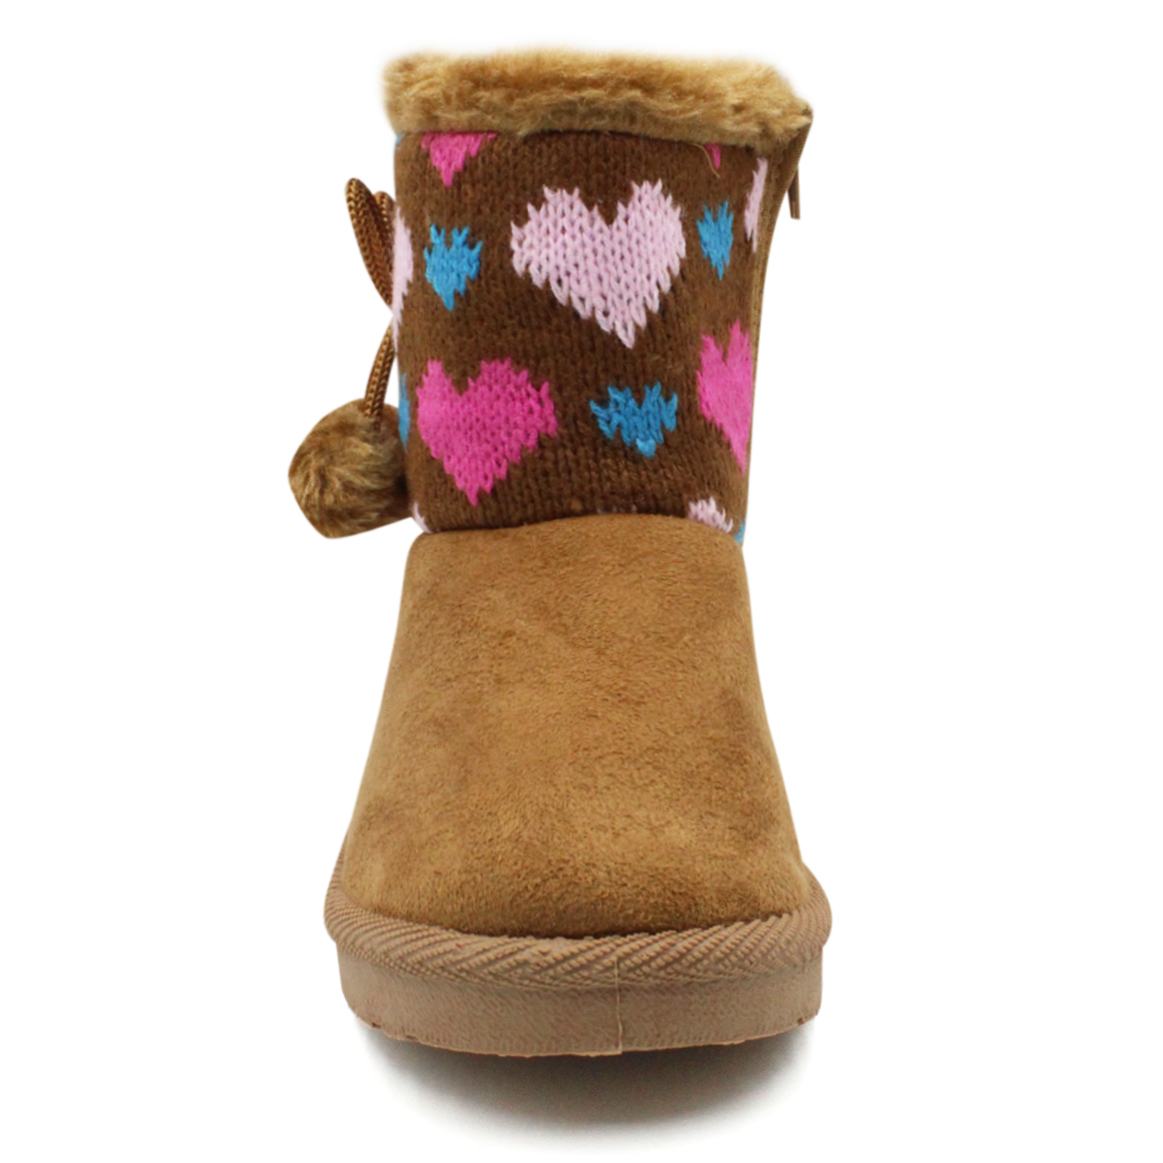 LAVRA Girls Classic Booties Faux Fur Lined Winter Snow Boots - image 2 of 6